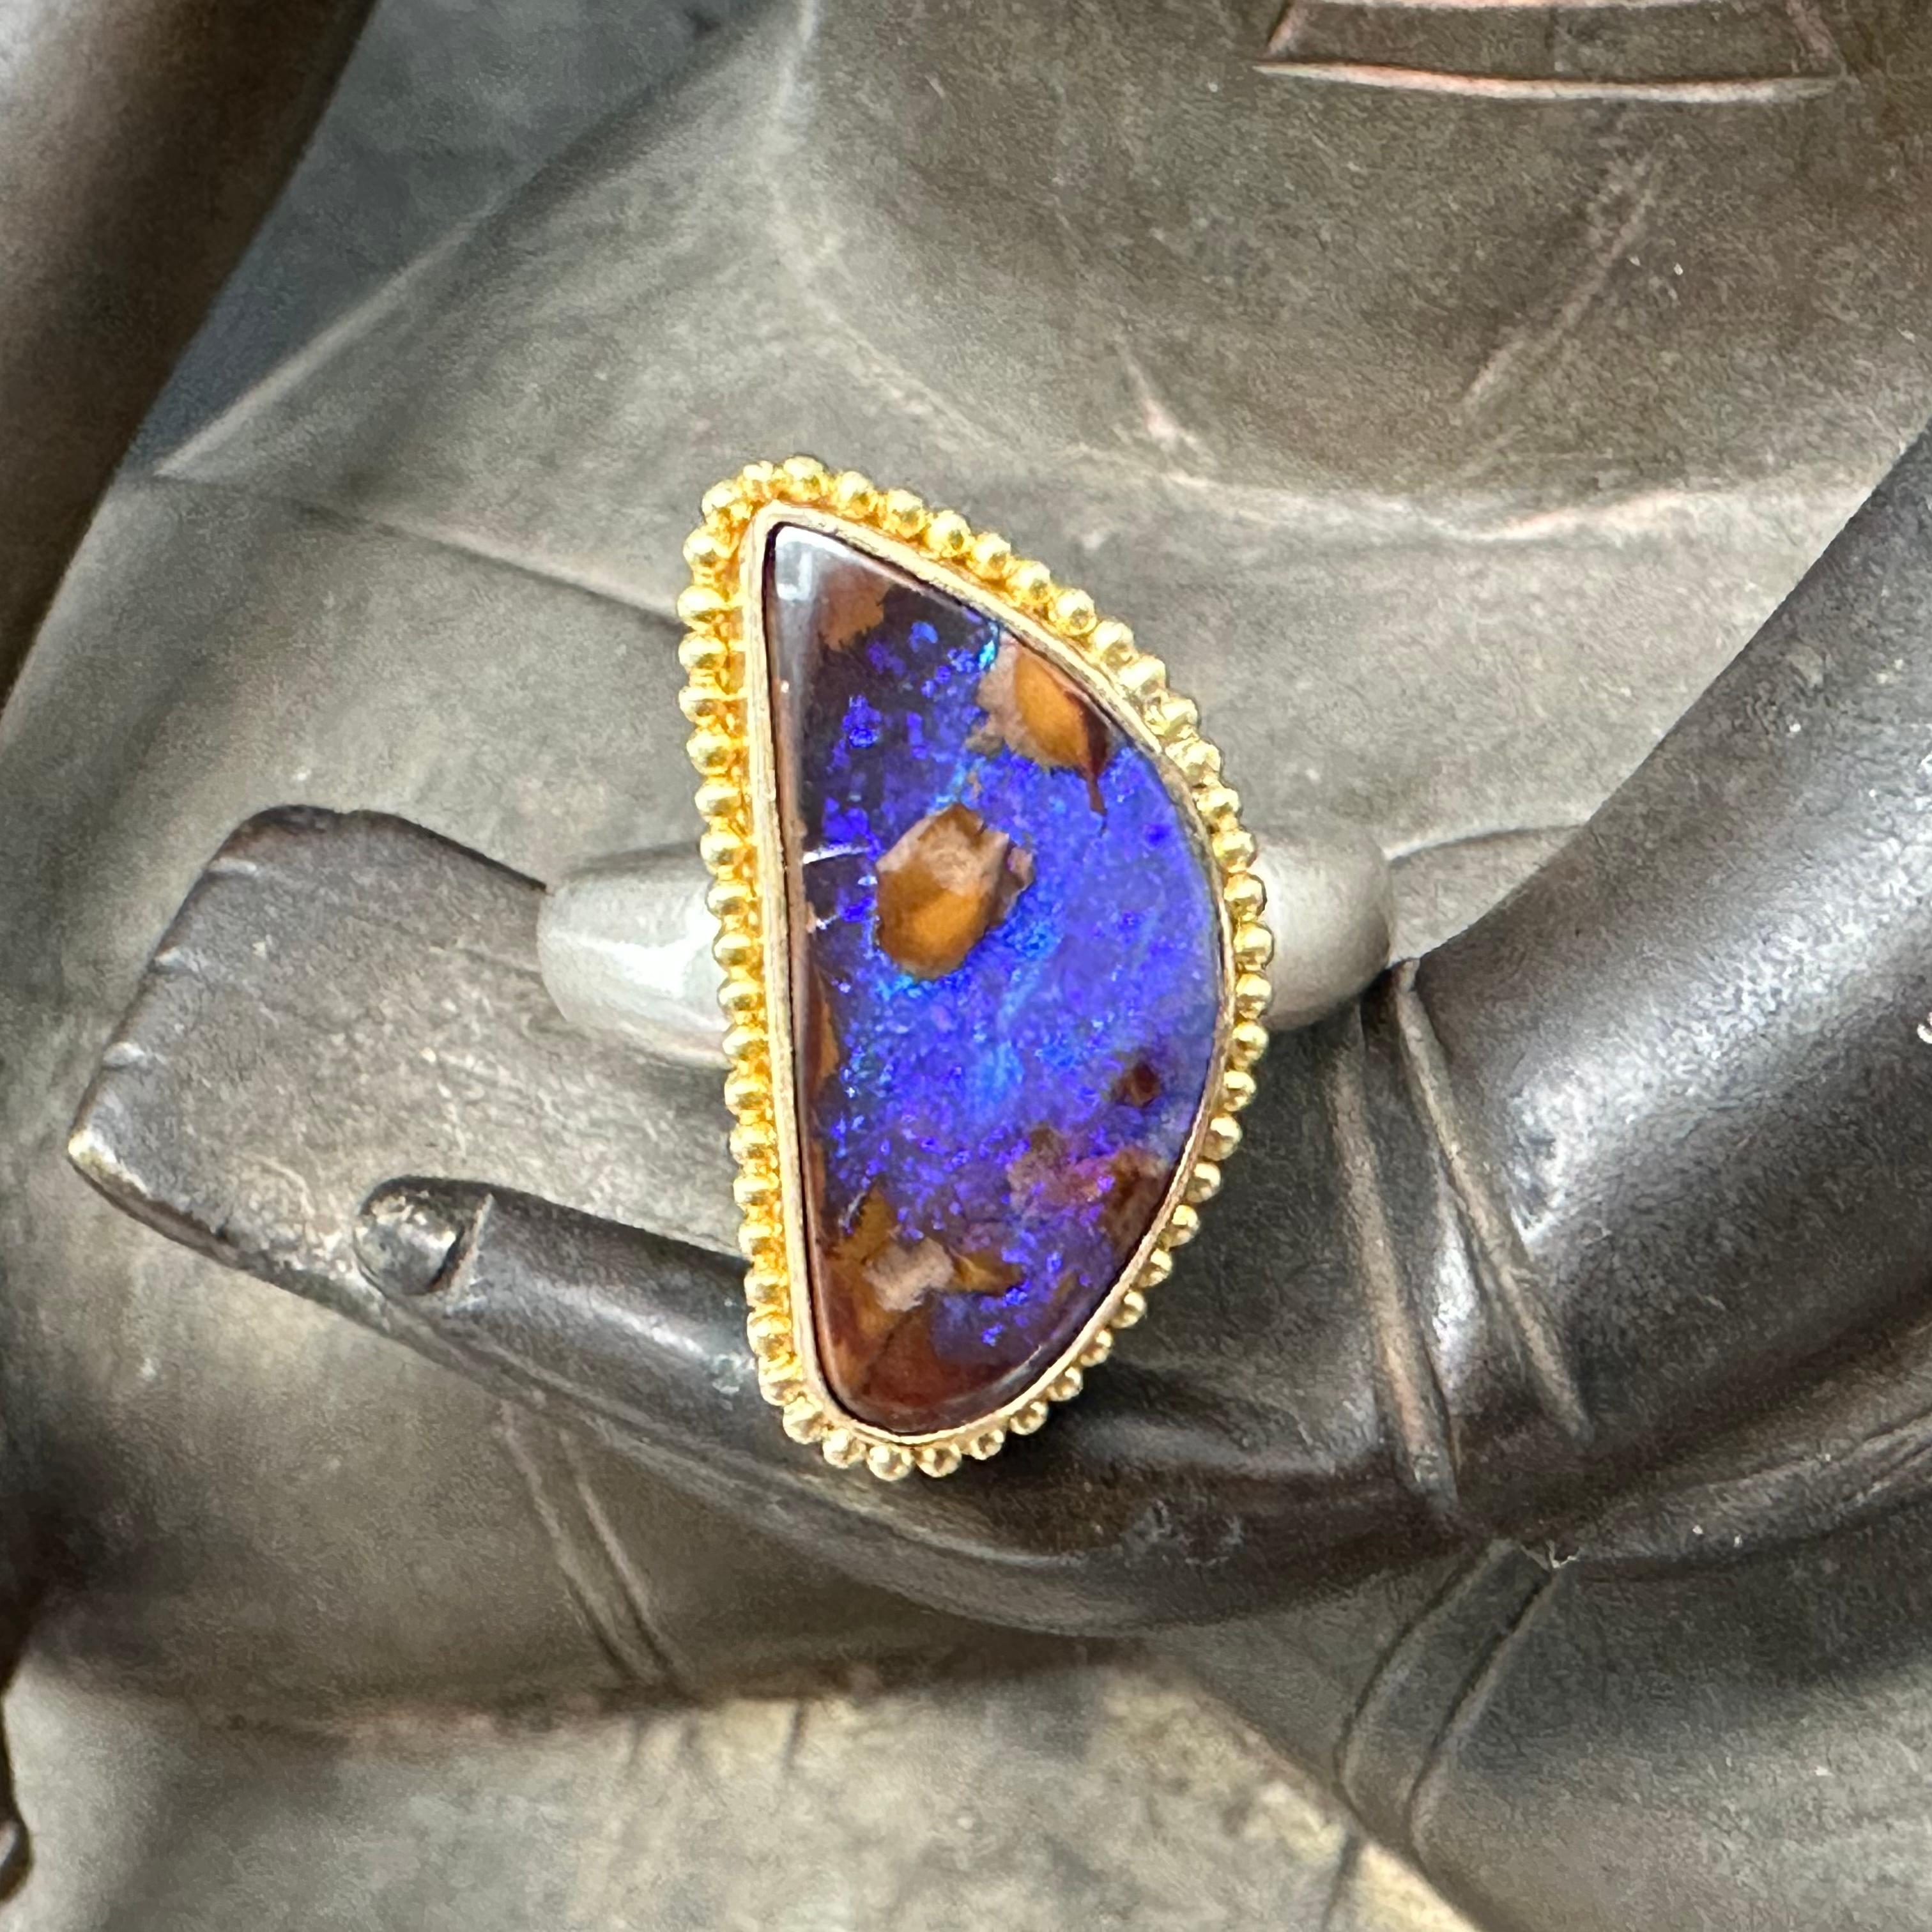 A beautiful irregular shaped 9 x 19 mm cabochon of Quipee mine Australian boulder opal displays sheens of brilliant blue again contrasting gold while set in a 